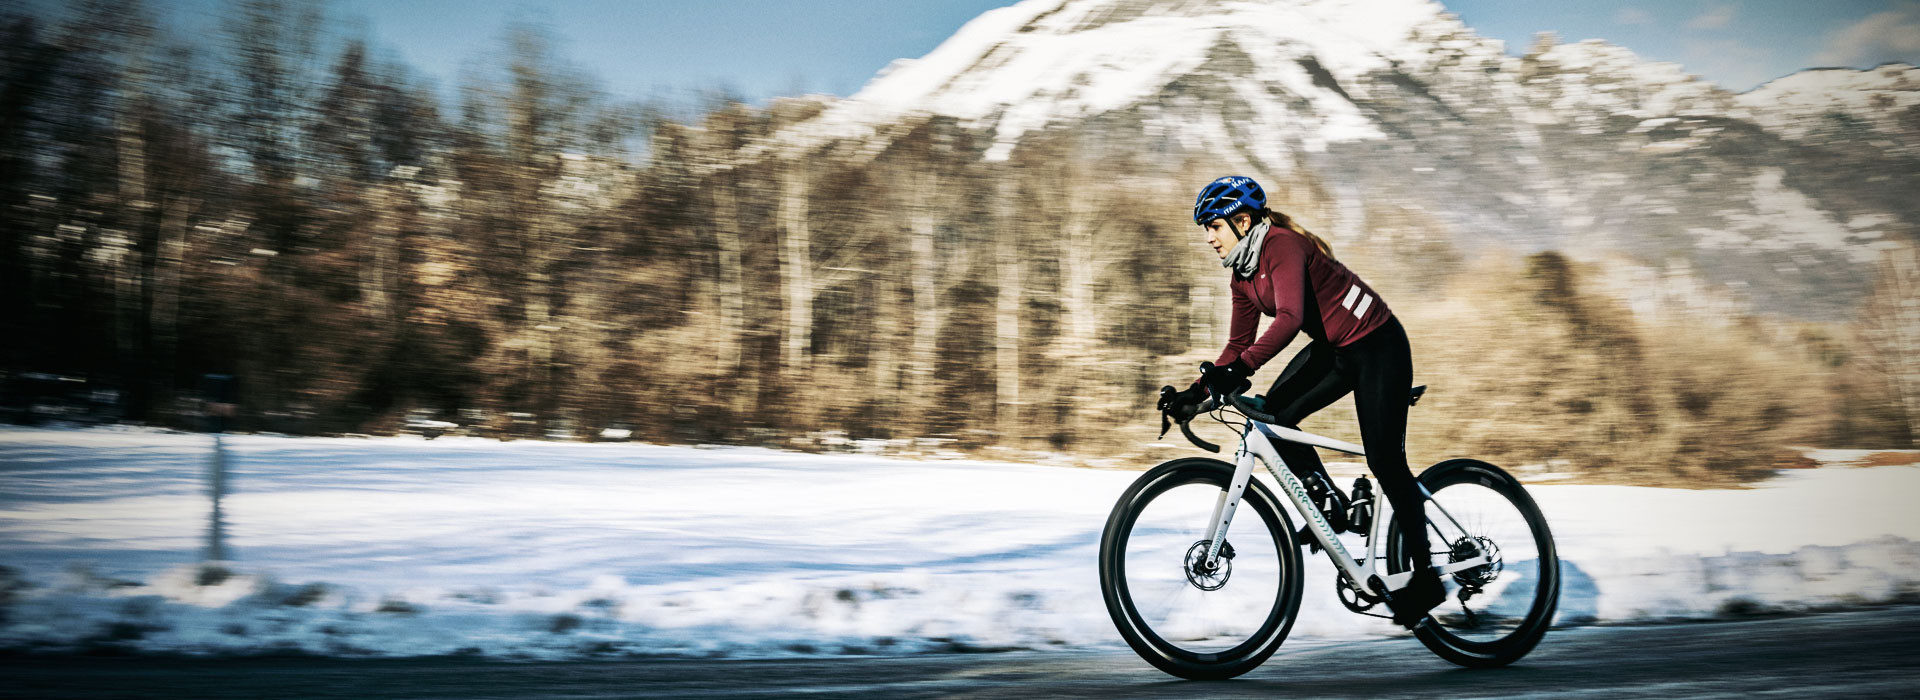 Demarchi - Winter cycling clothing